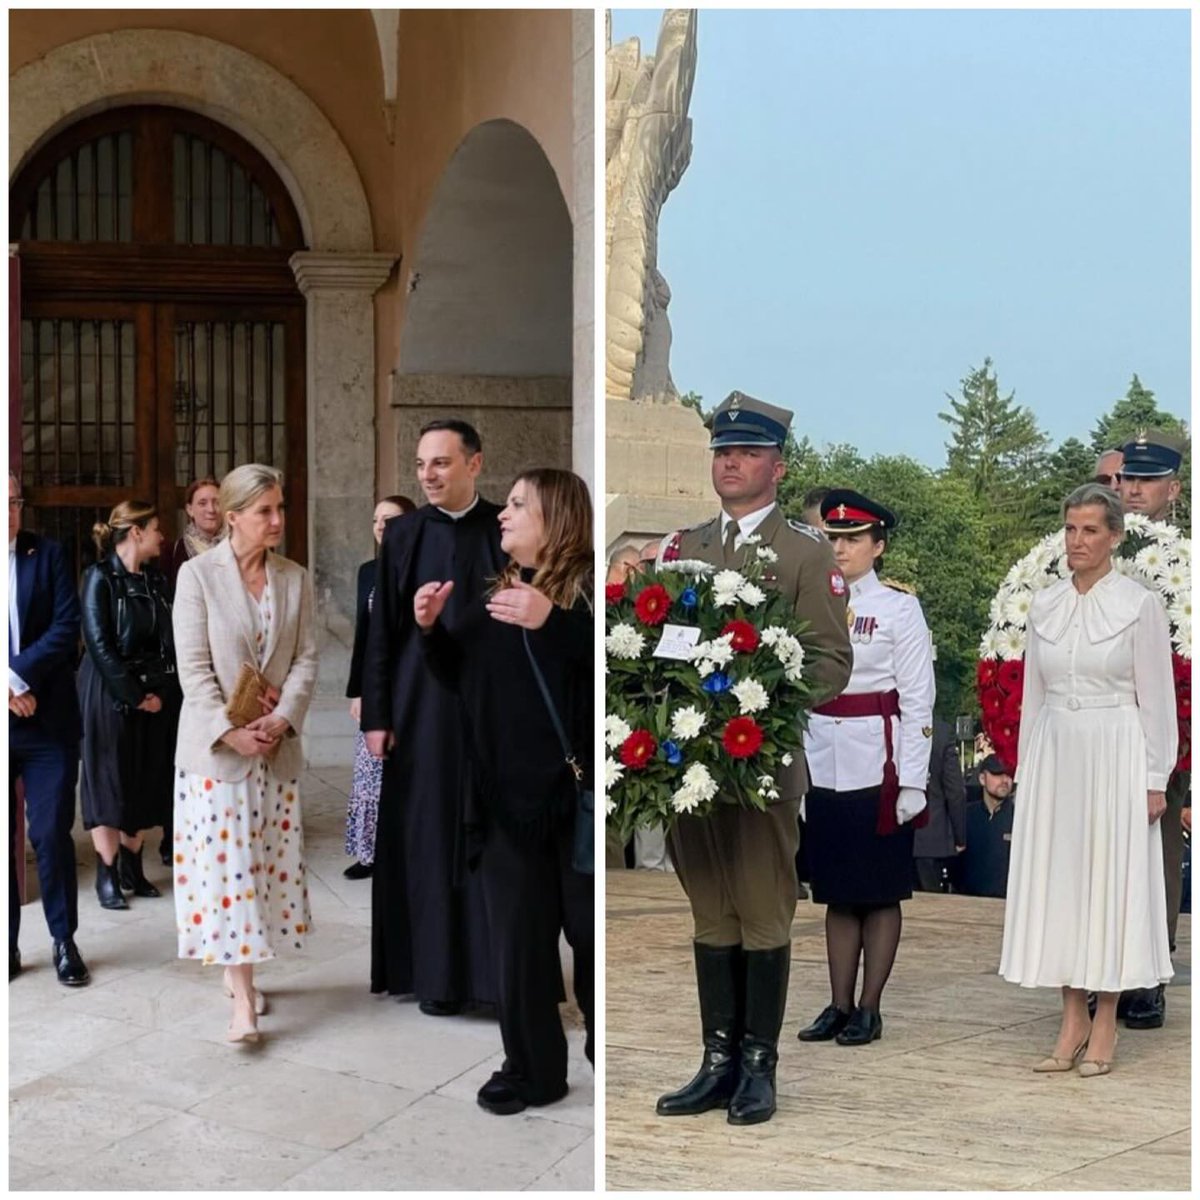 The Duchess of Edinburgh was in Italy to commemorate the 80th anniversary of the Monte Cassino May 18th 1944